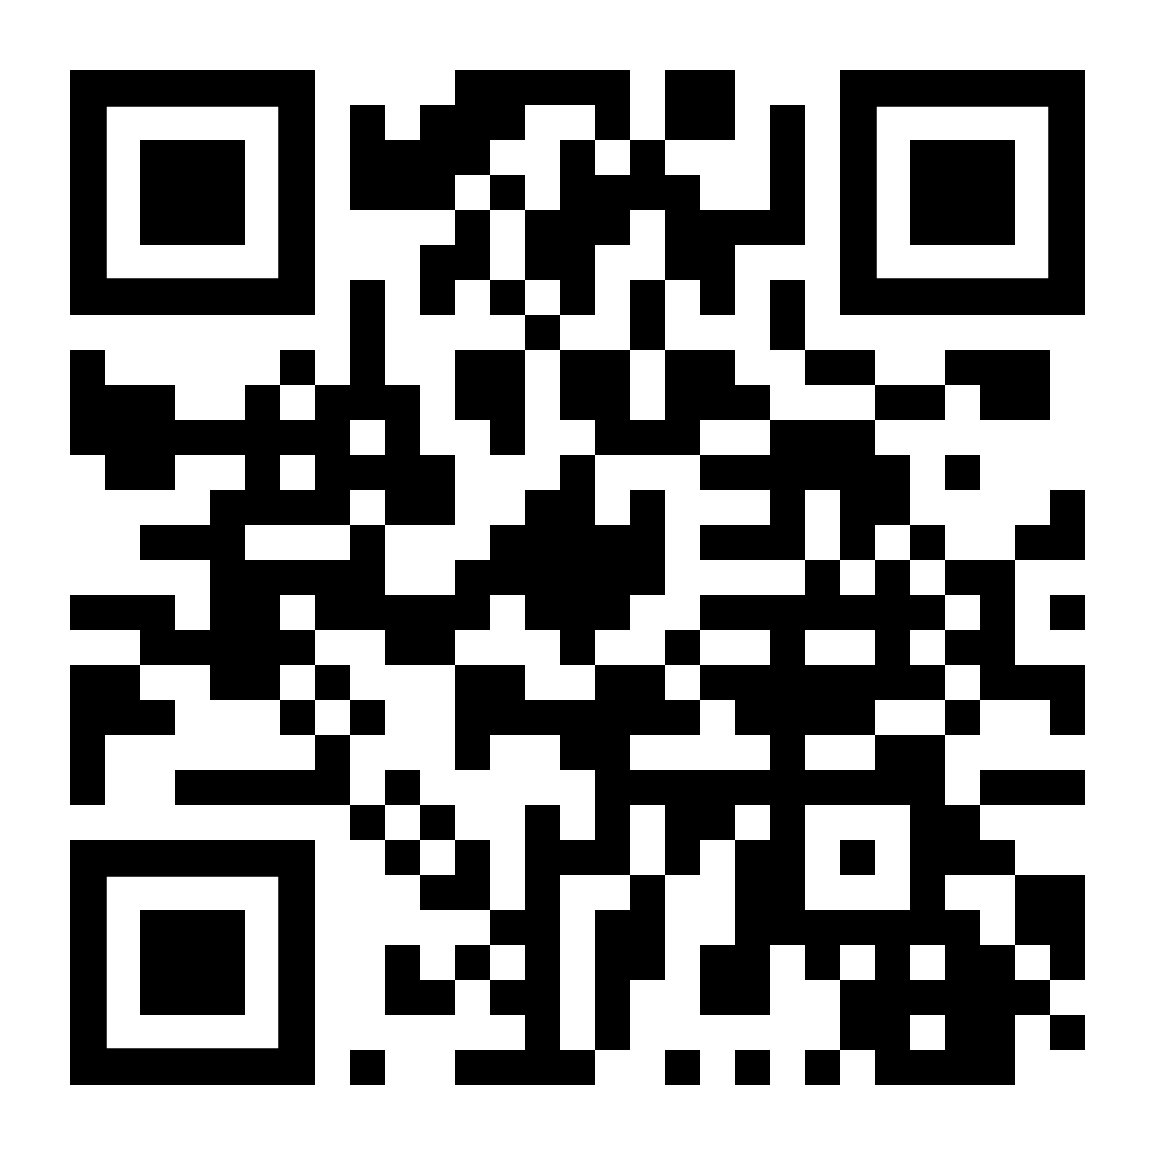 QRCode Kappelrodeck App Play-Store